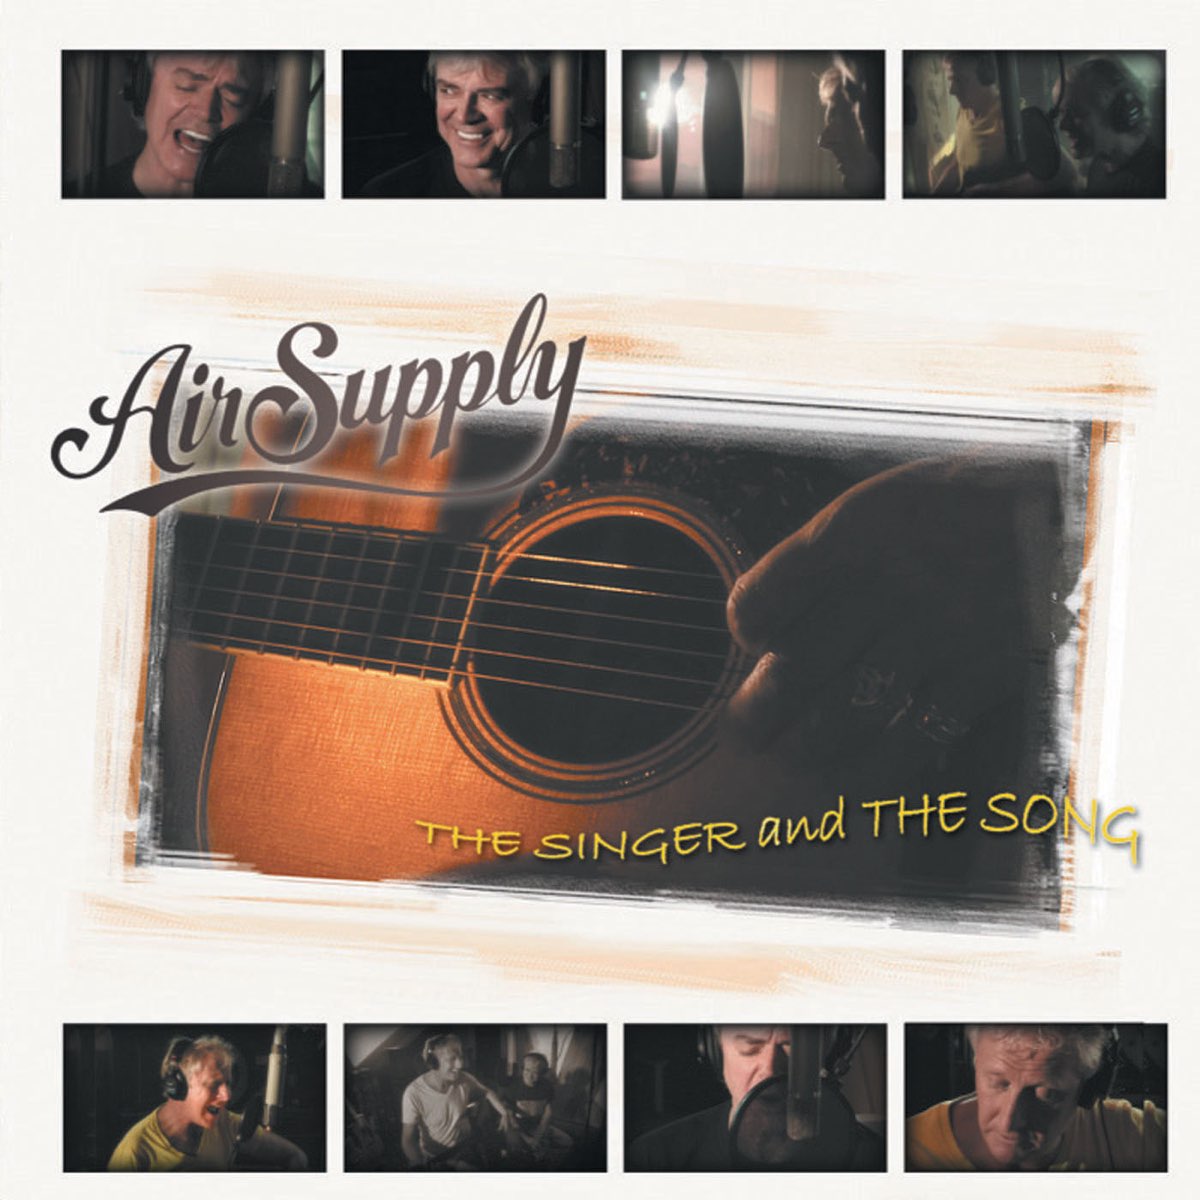 The Singer and the Song by Air Supply on Apple Music